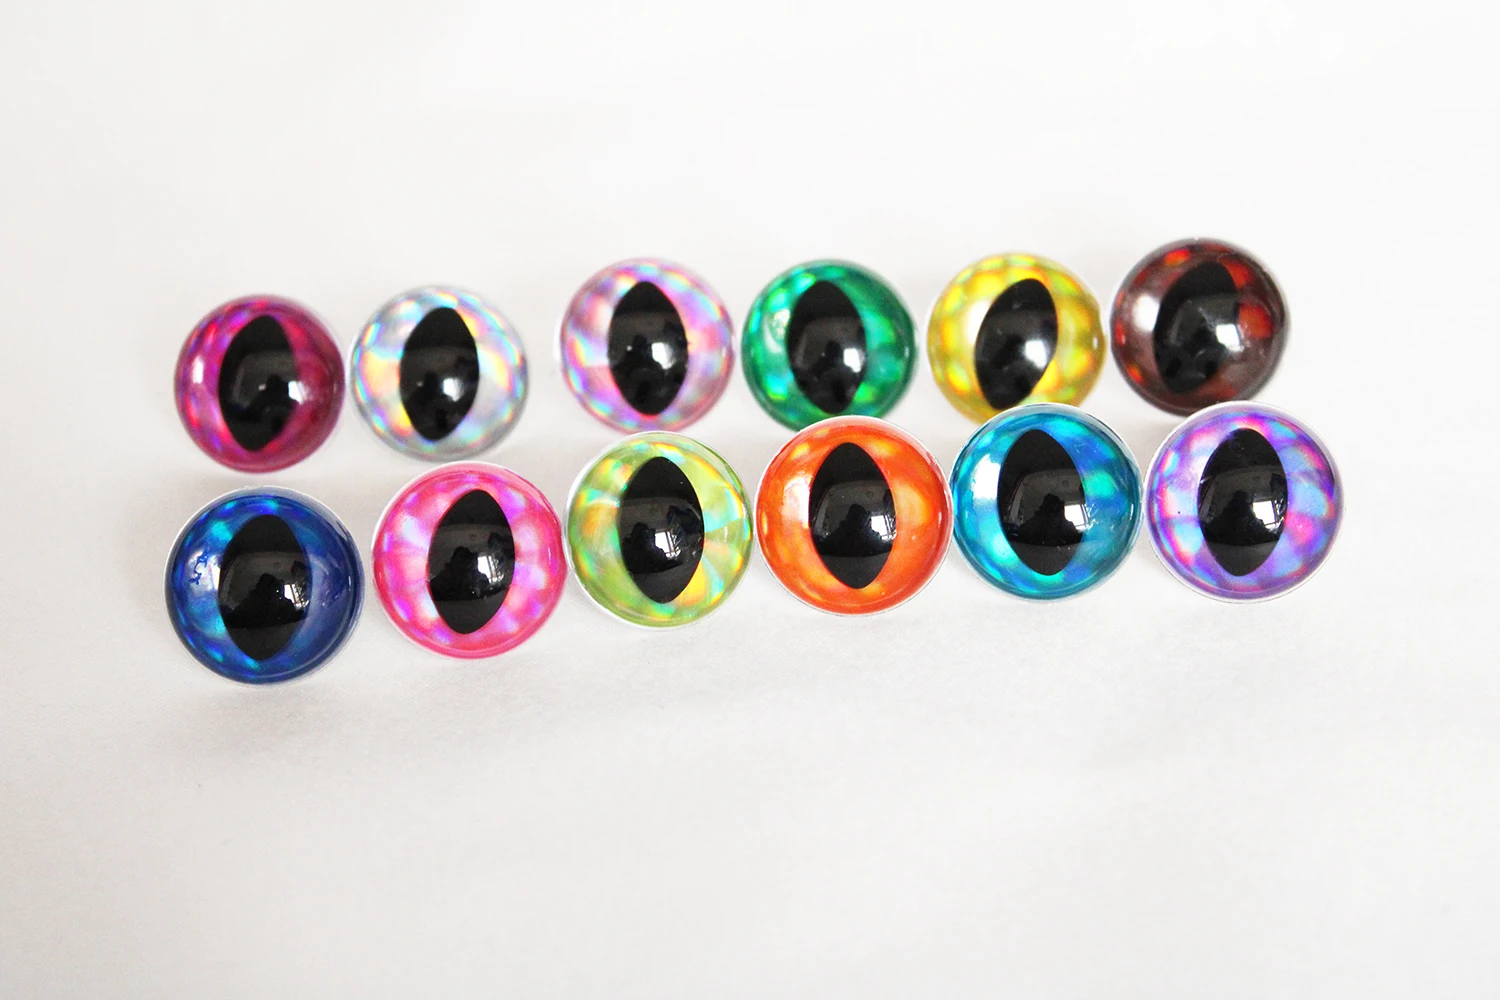 100pcs 9mm 10mm 12mm 13mm 14mm 15mm 16mm 18mm 24mm 30mm  glitter clear safety toy cat eyes with hand washer for doll eyes  -D12